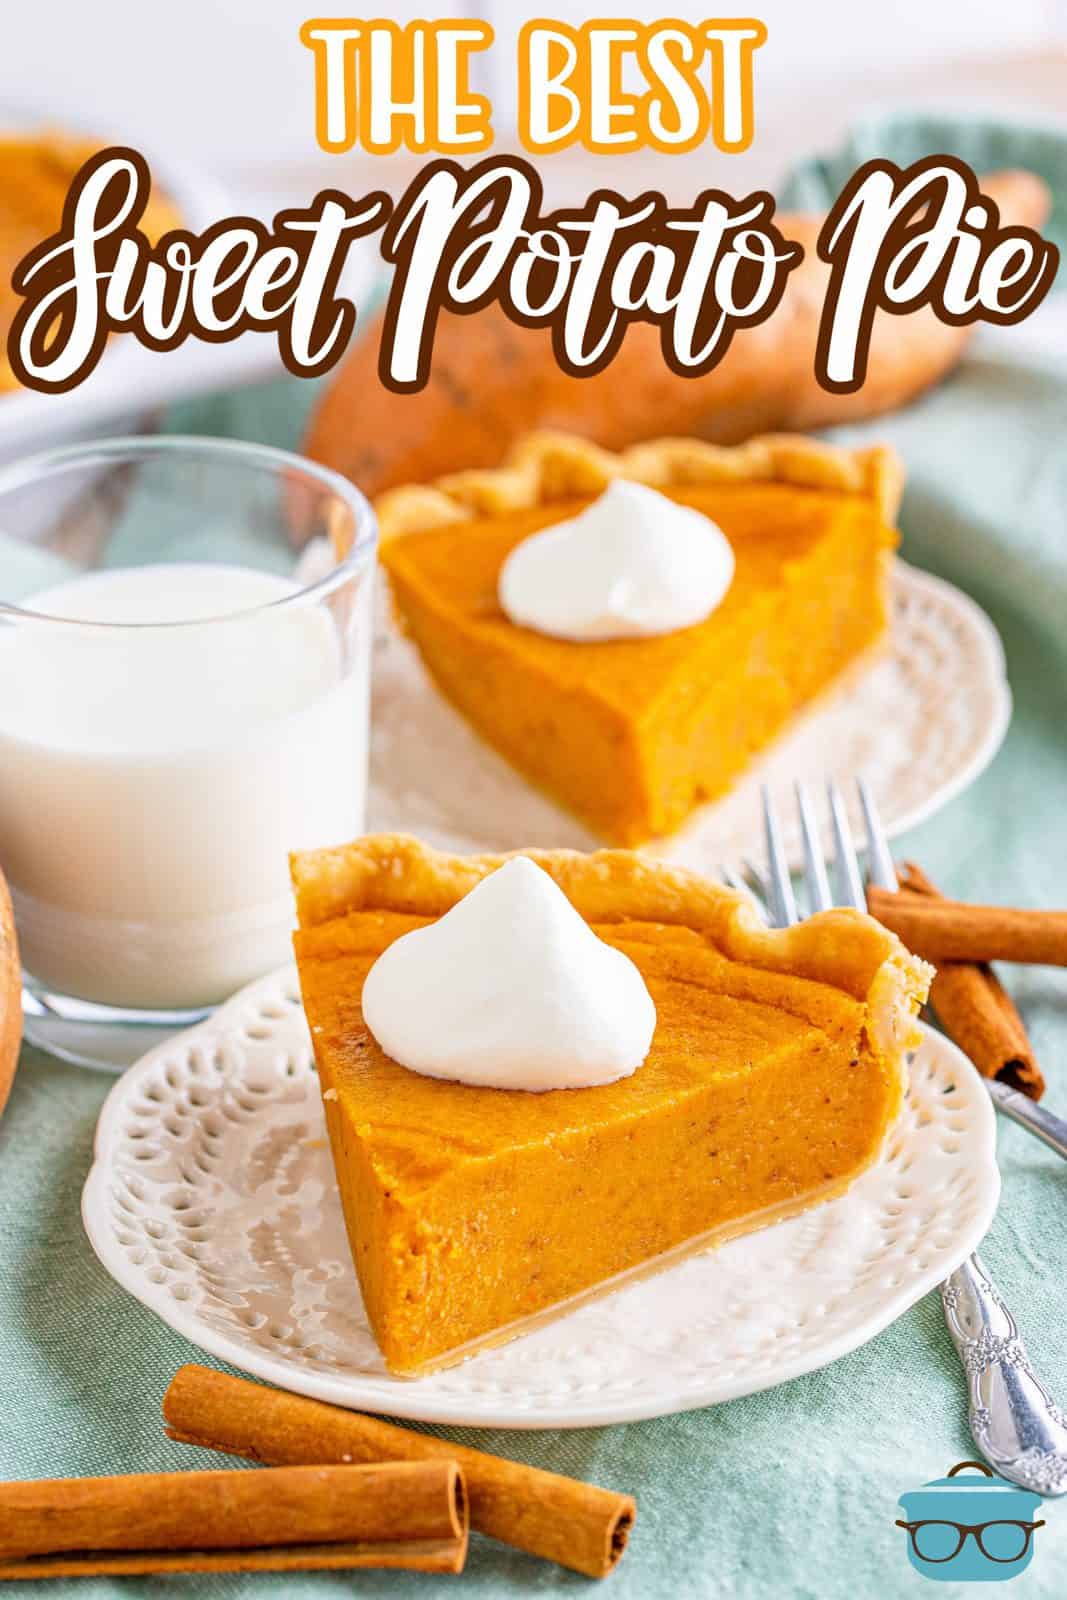 Pinterest image of slice of Sweet Potato Pie on white plate with milk and cinnamon sticks.